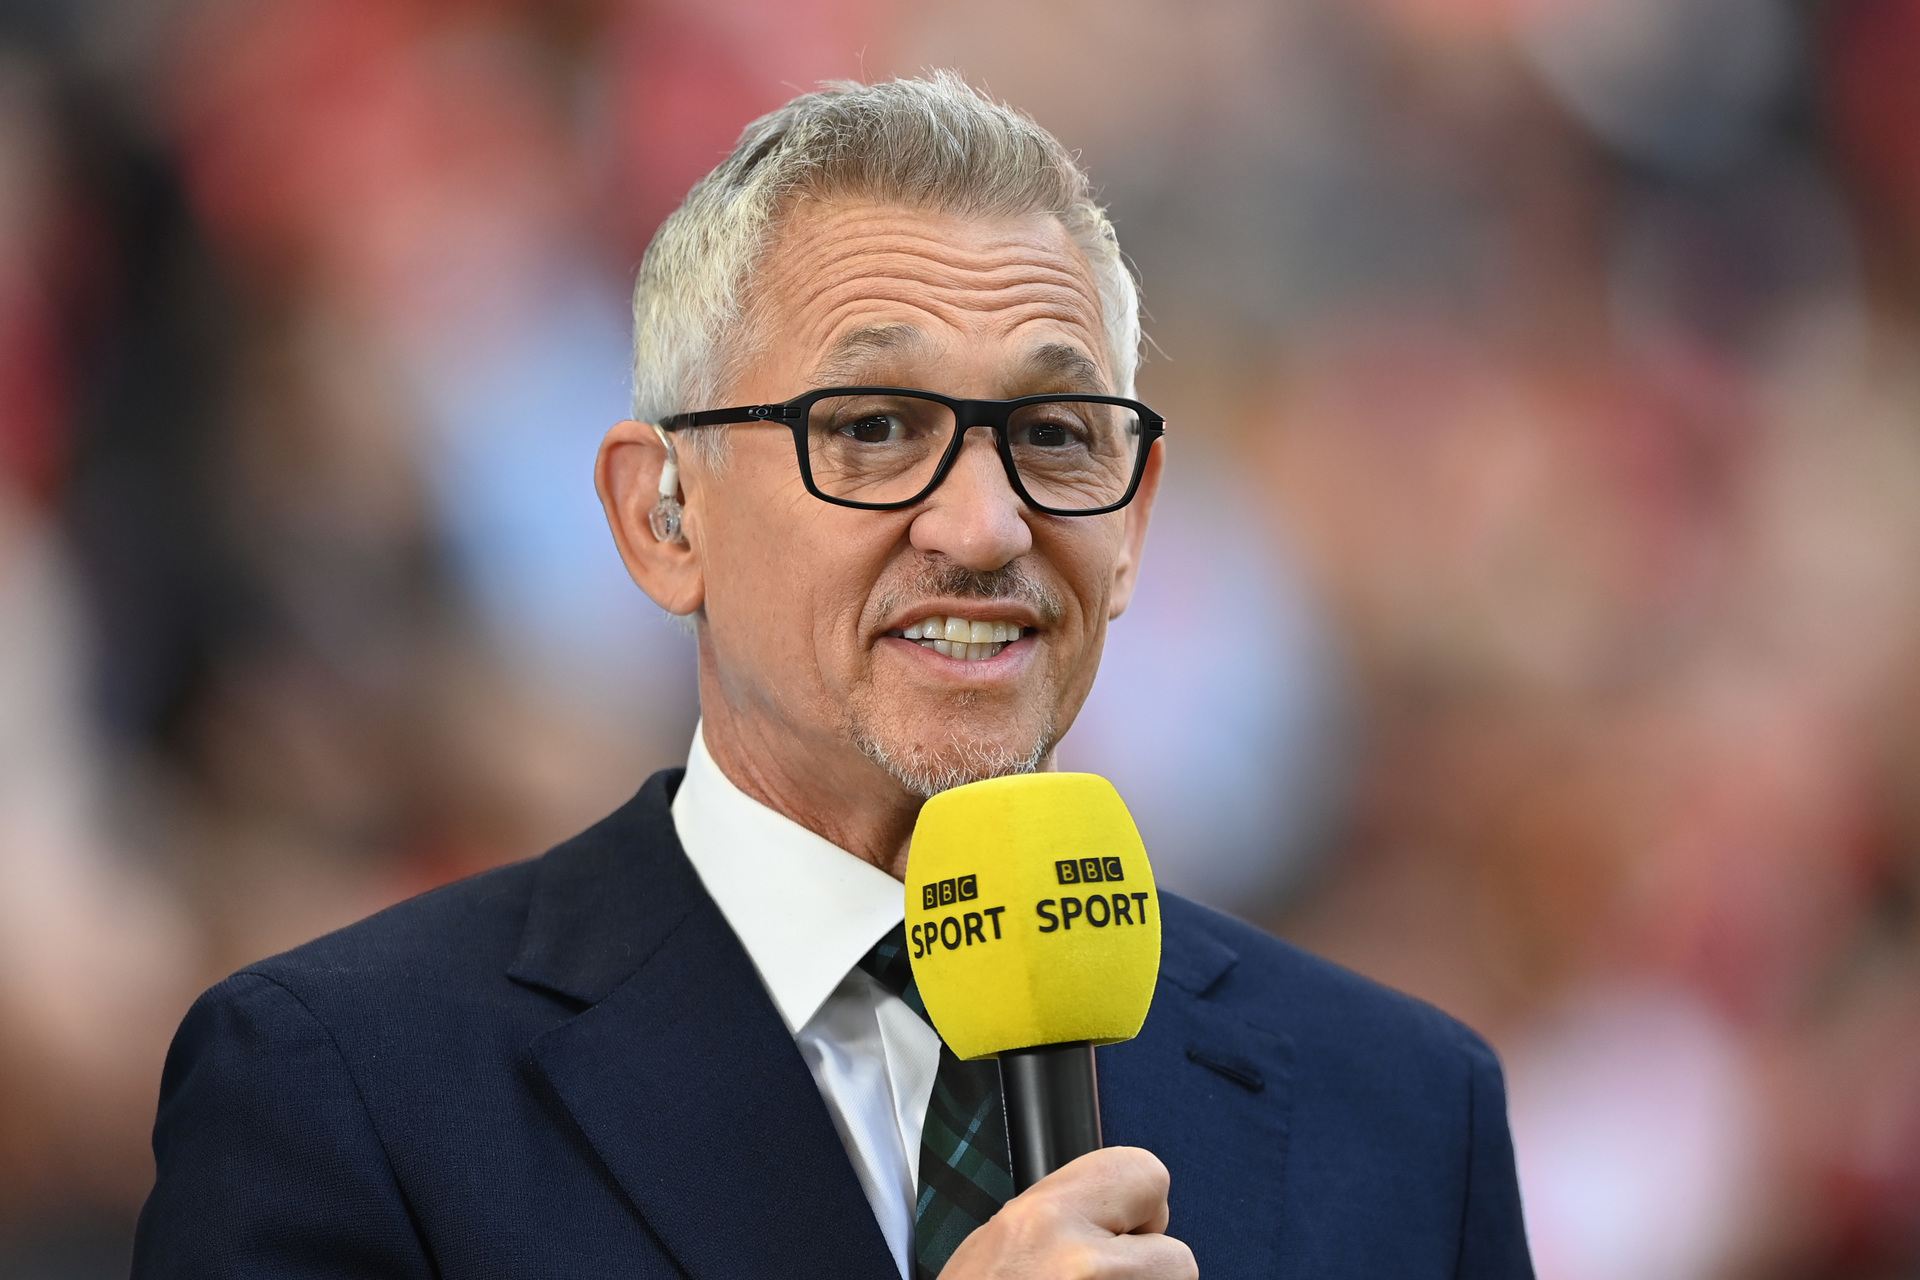 Gary Lineker criticised the UK Government's asylum policy.